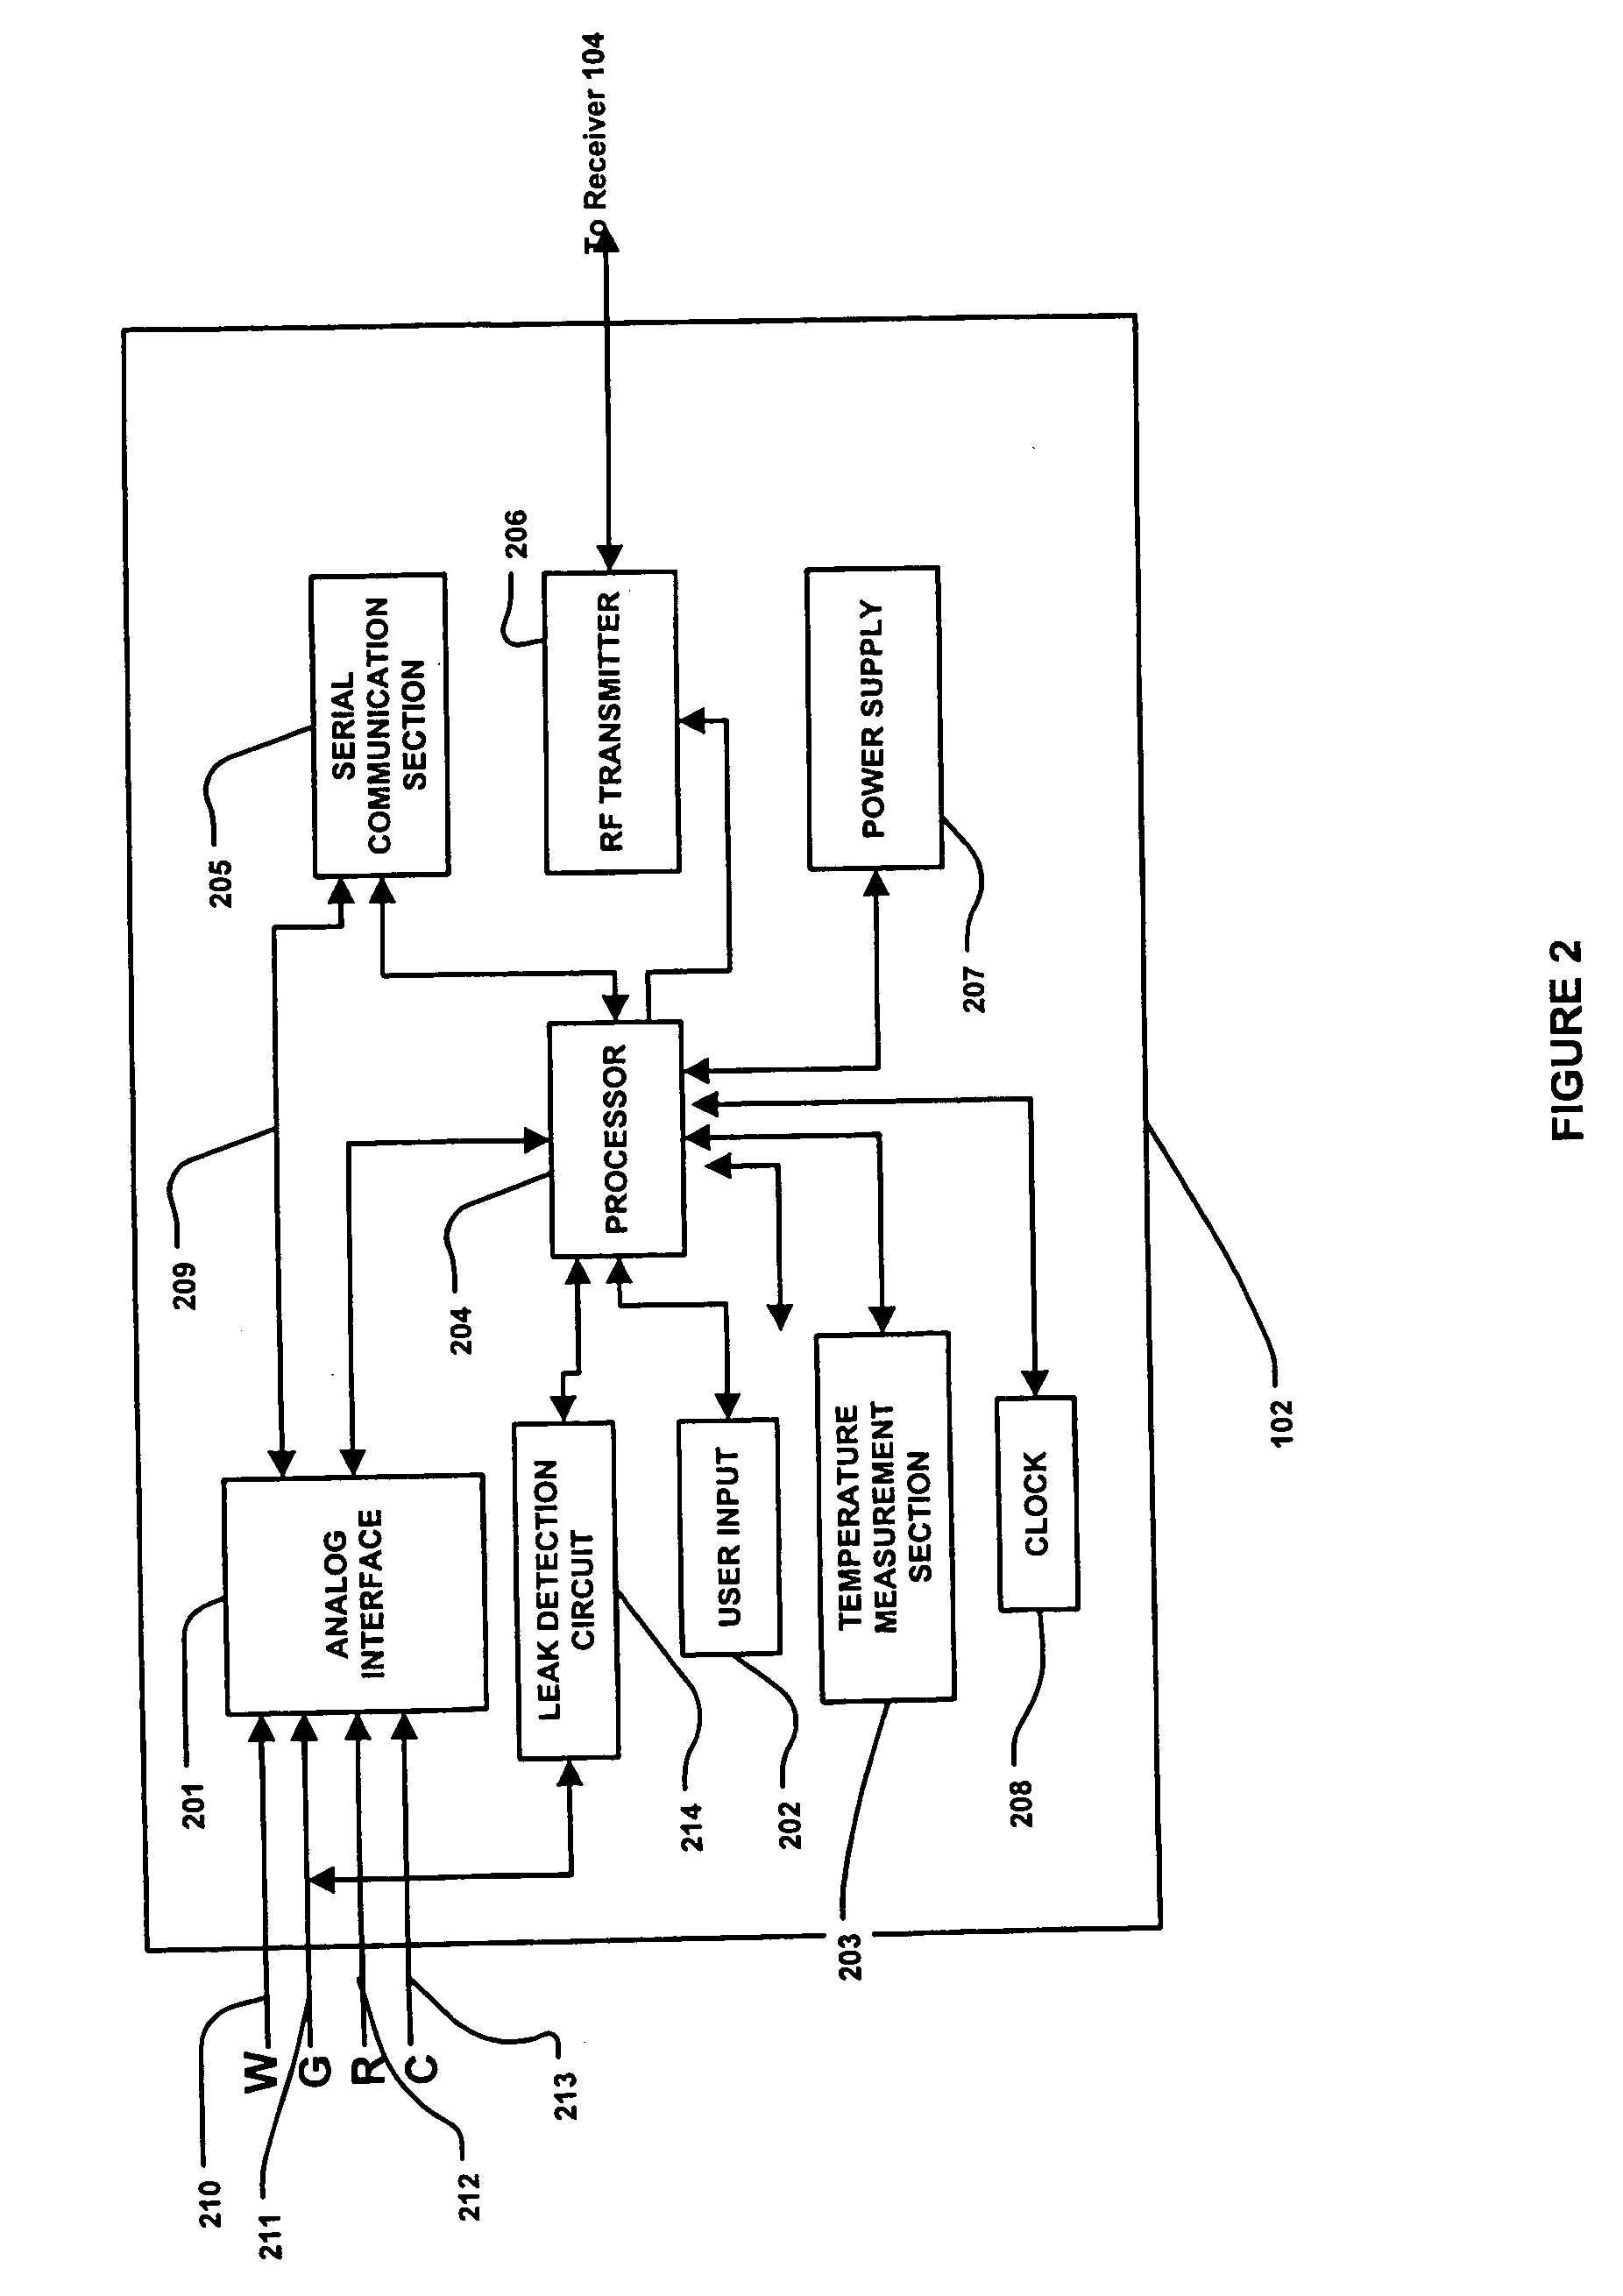 Method and apparatus for providing leak detection in data monitoring and management systems